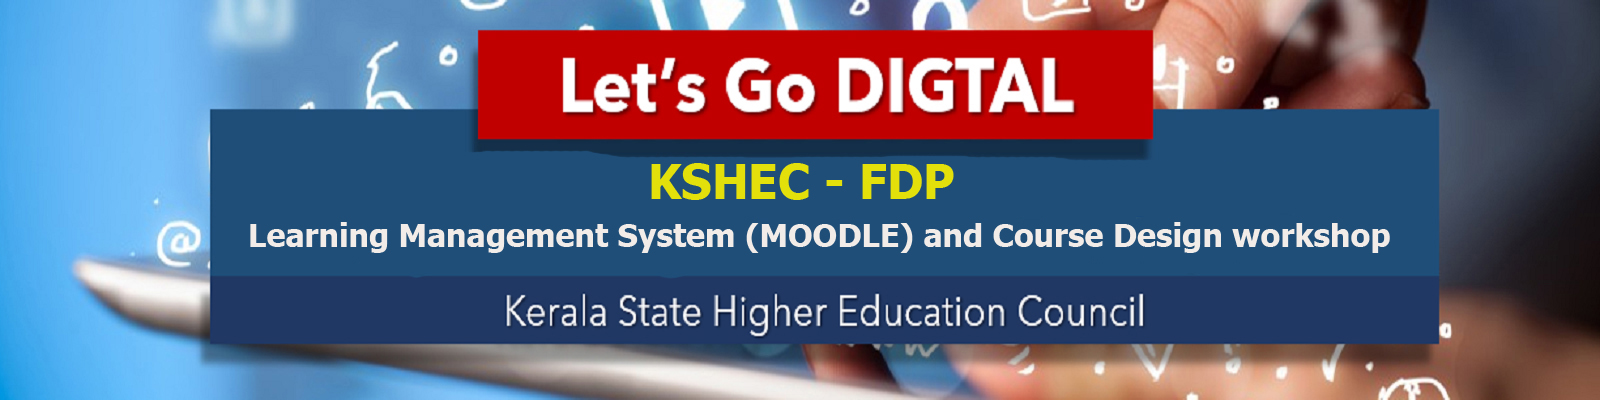 KSHEC - FDP Learning Management System (MOODLE) and Course Design